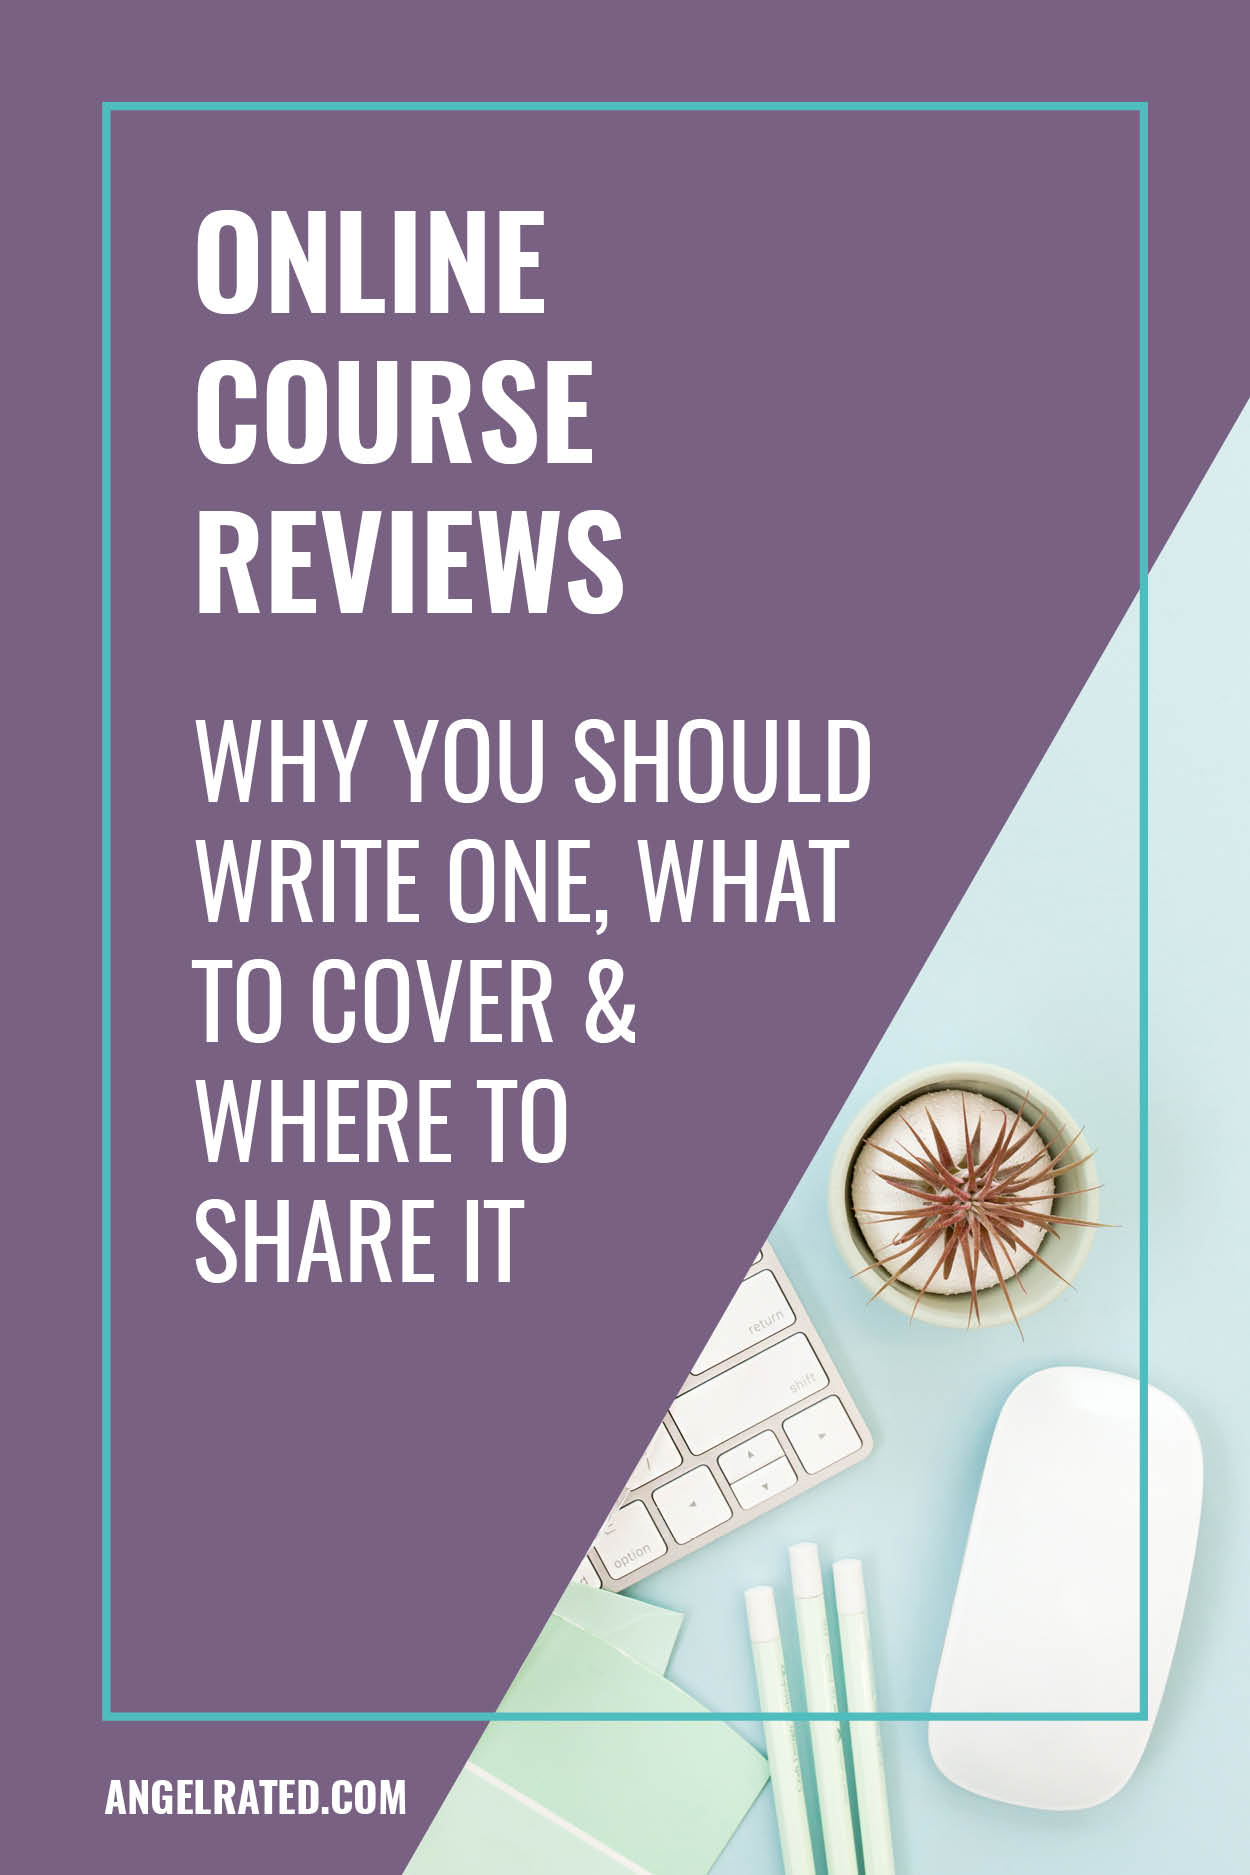 Guide to how to review an online course